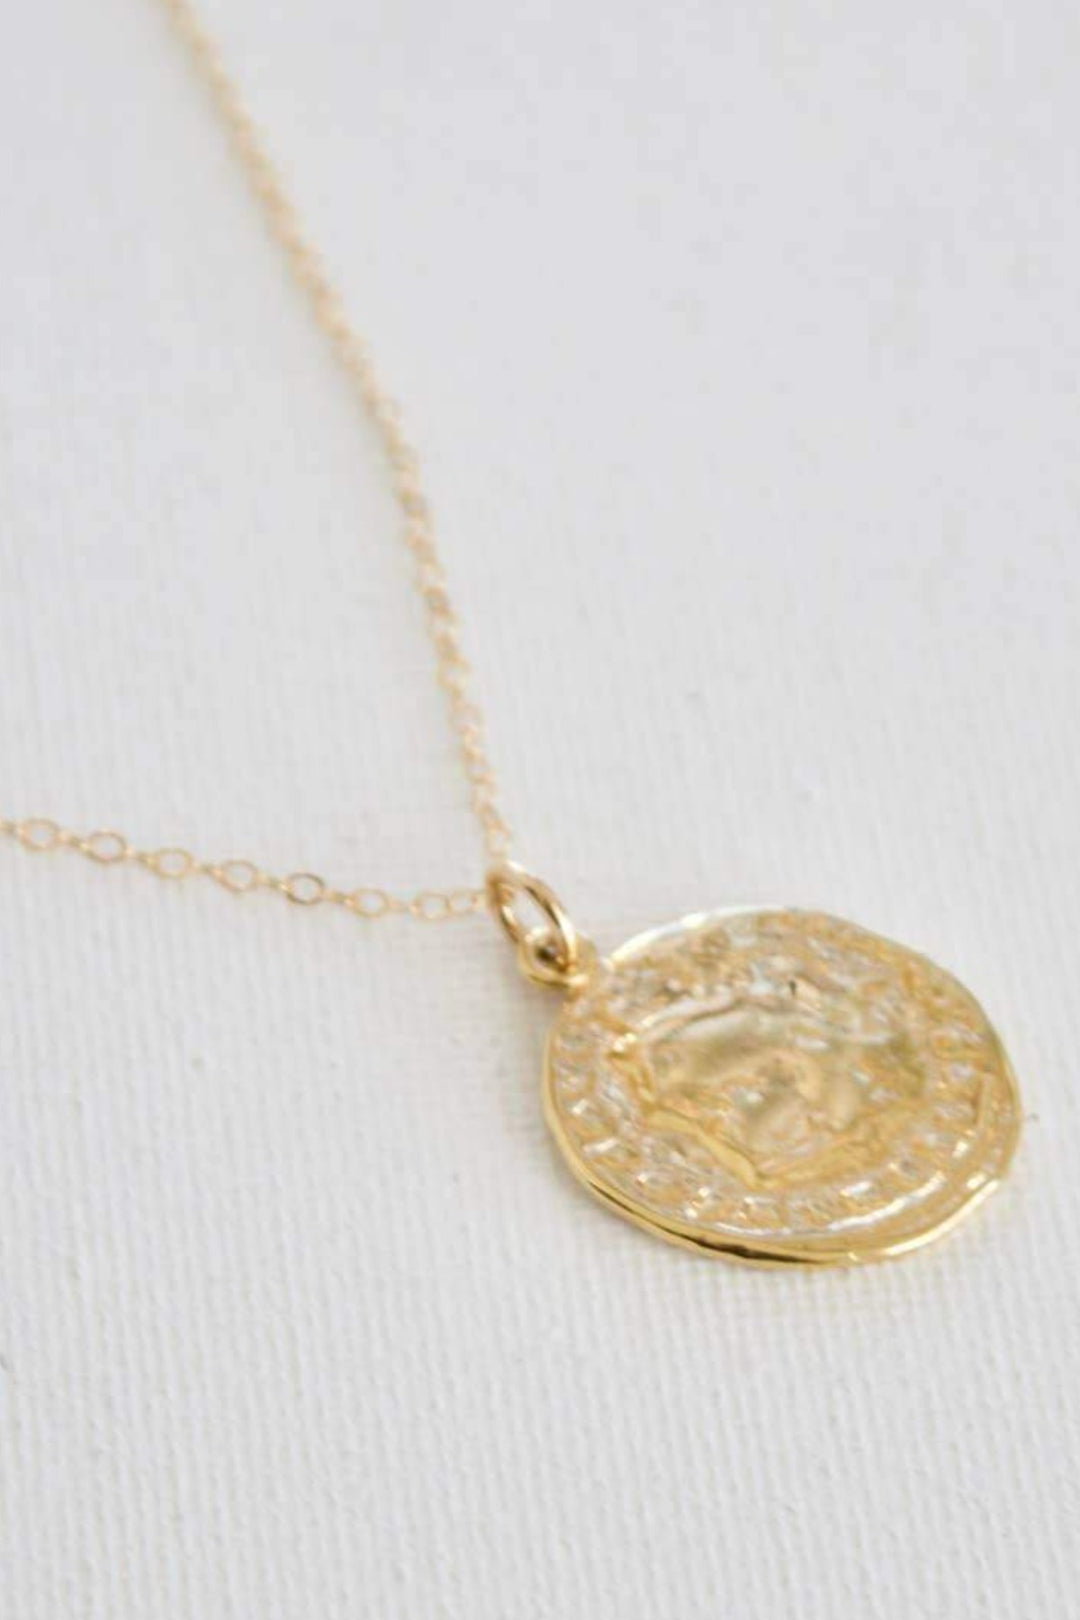 CABLE CHAIN WITH GOLD PLATE COIN PENDANT - [jayden_p]